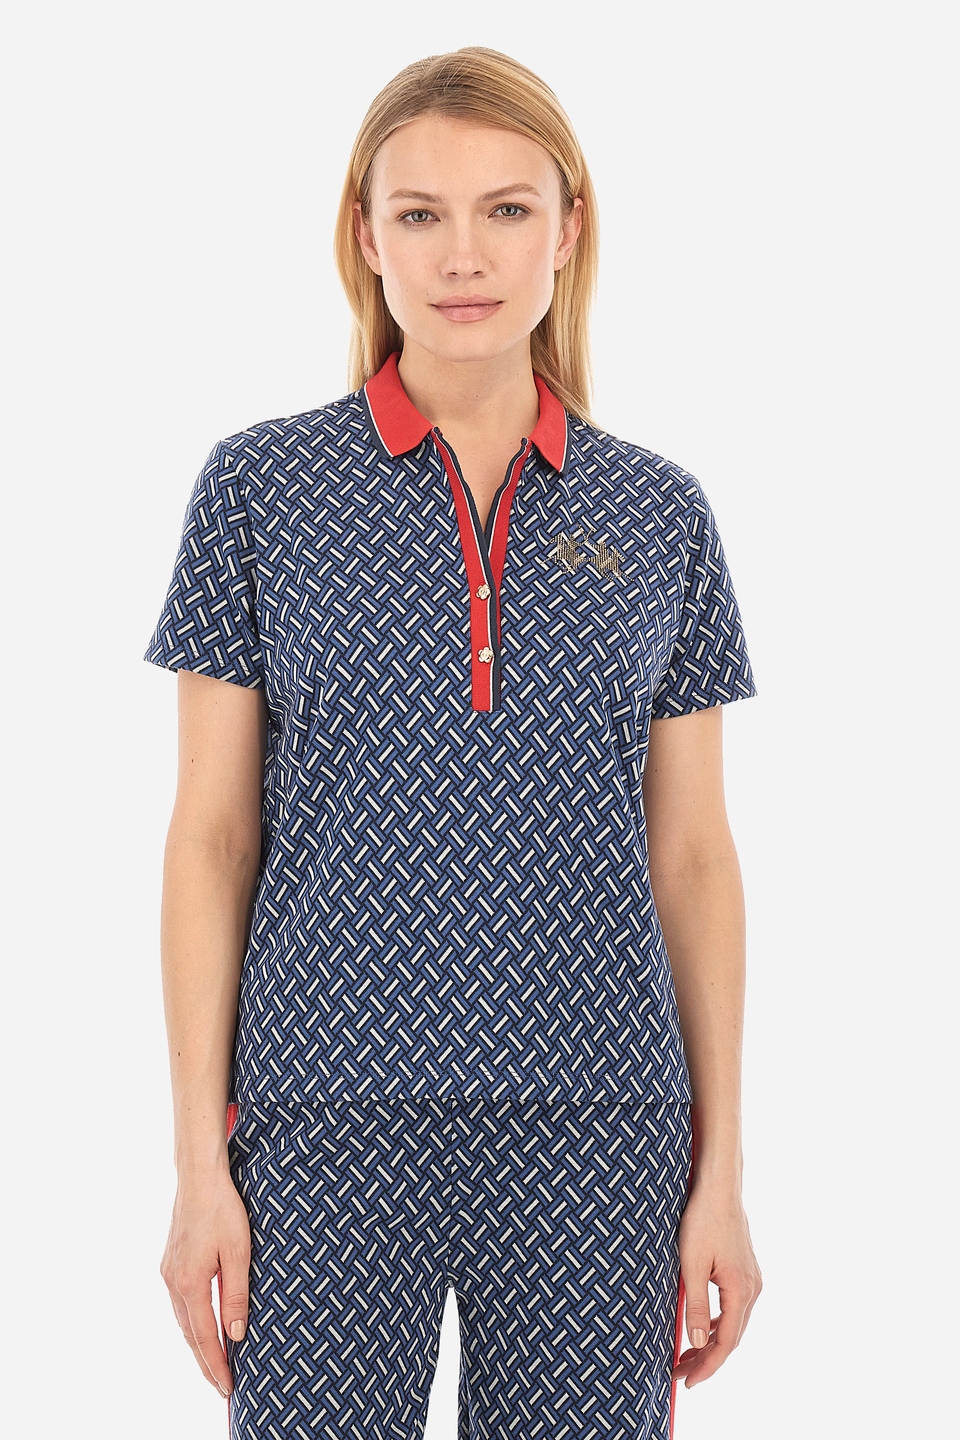 Women's polo shirt in a regular fit - Whitny | La Martina - Official Online Shop